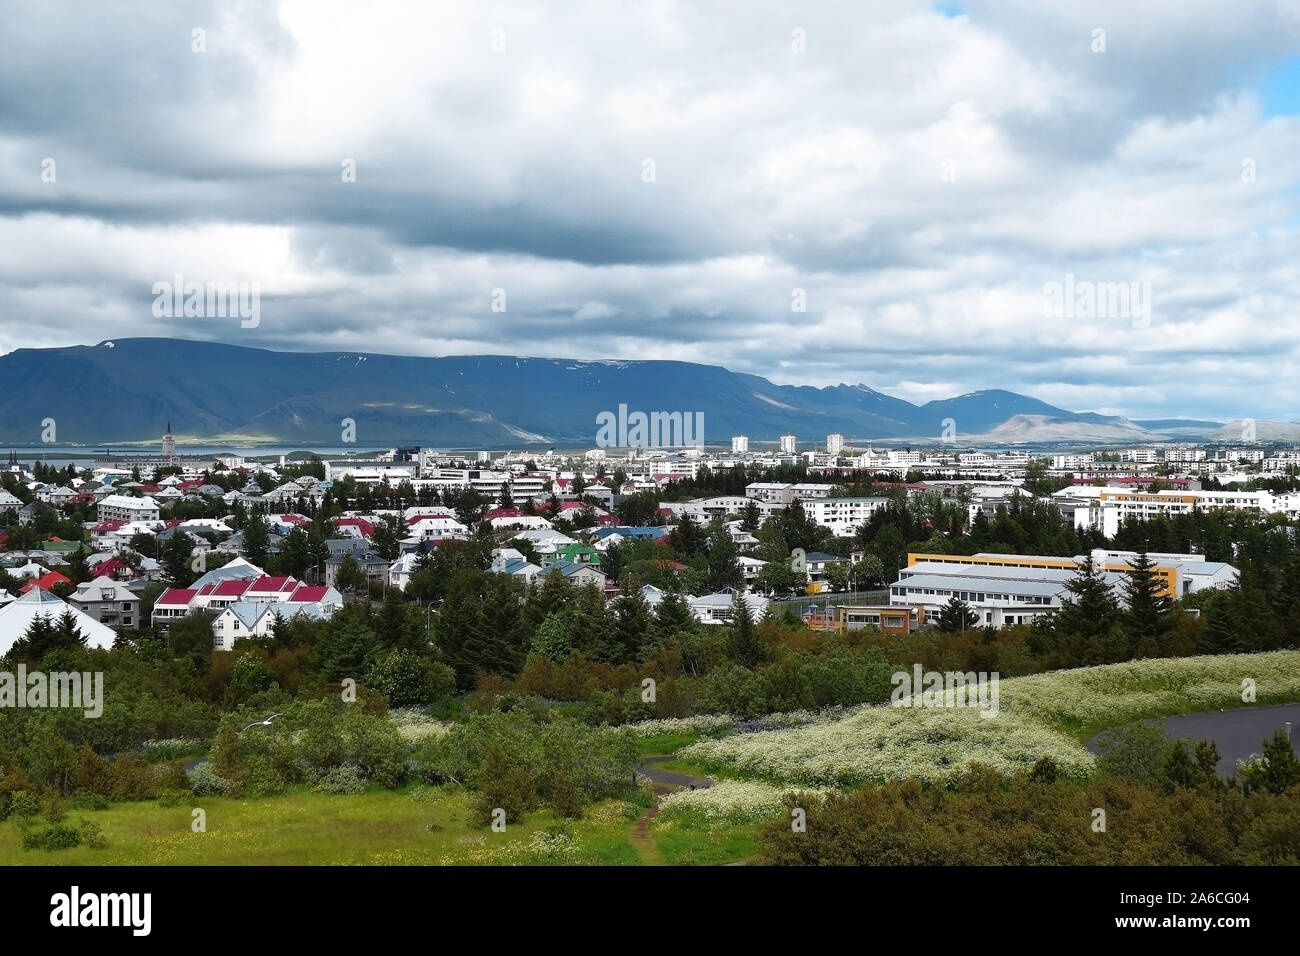 Reykjavik, Iceland panoramic view, with colorful rooftops, green trees and blue skies Stock Photo